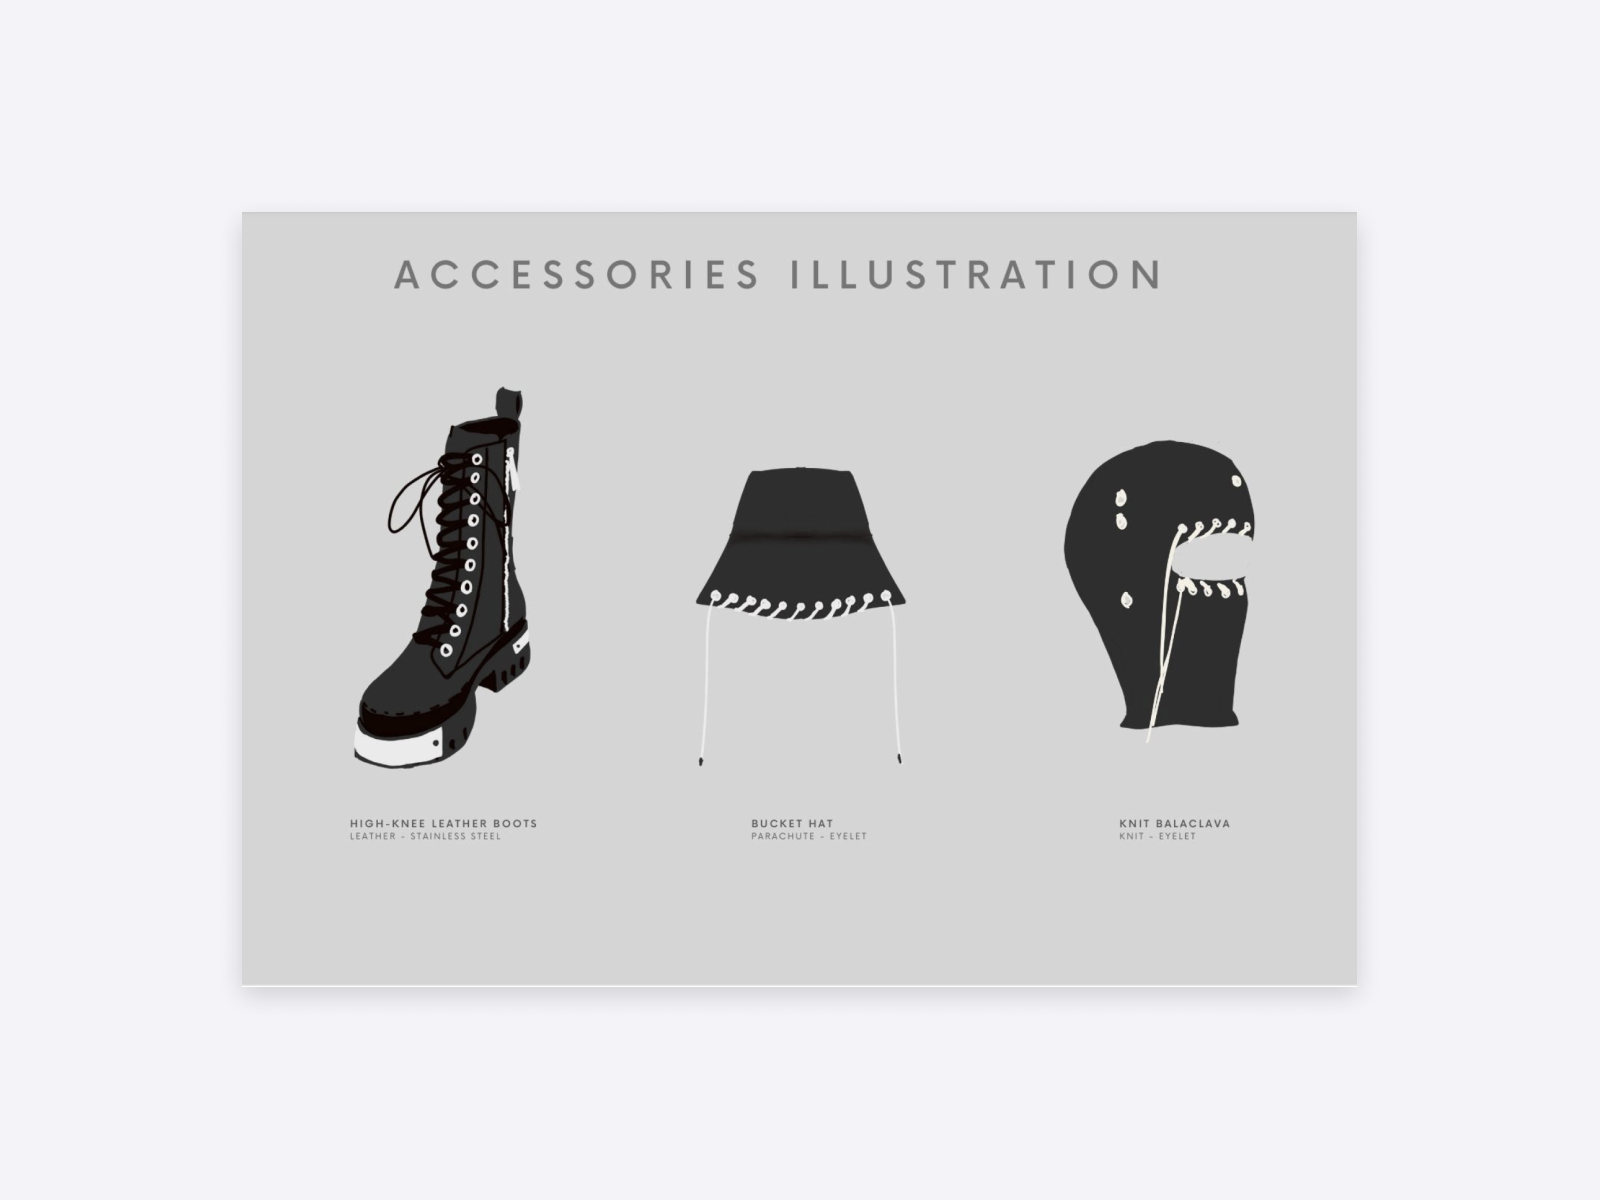 Accessories illustration from Verrel's collection.